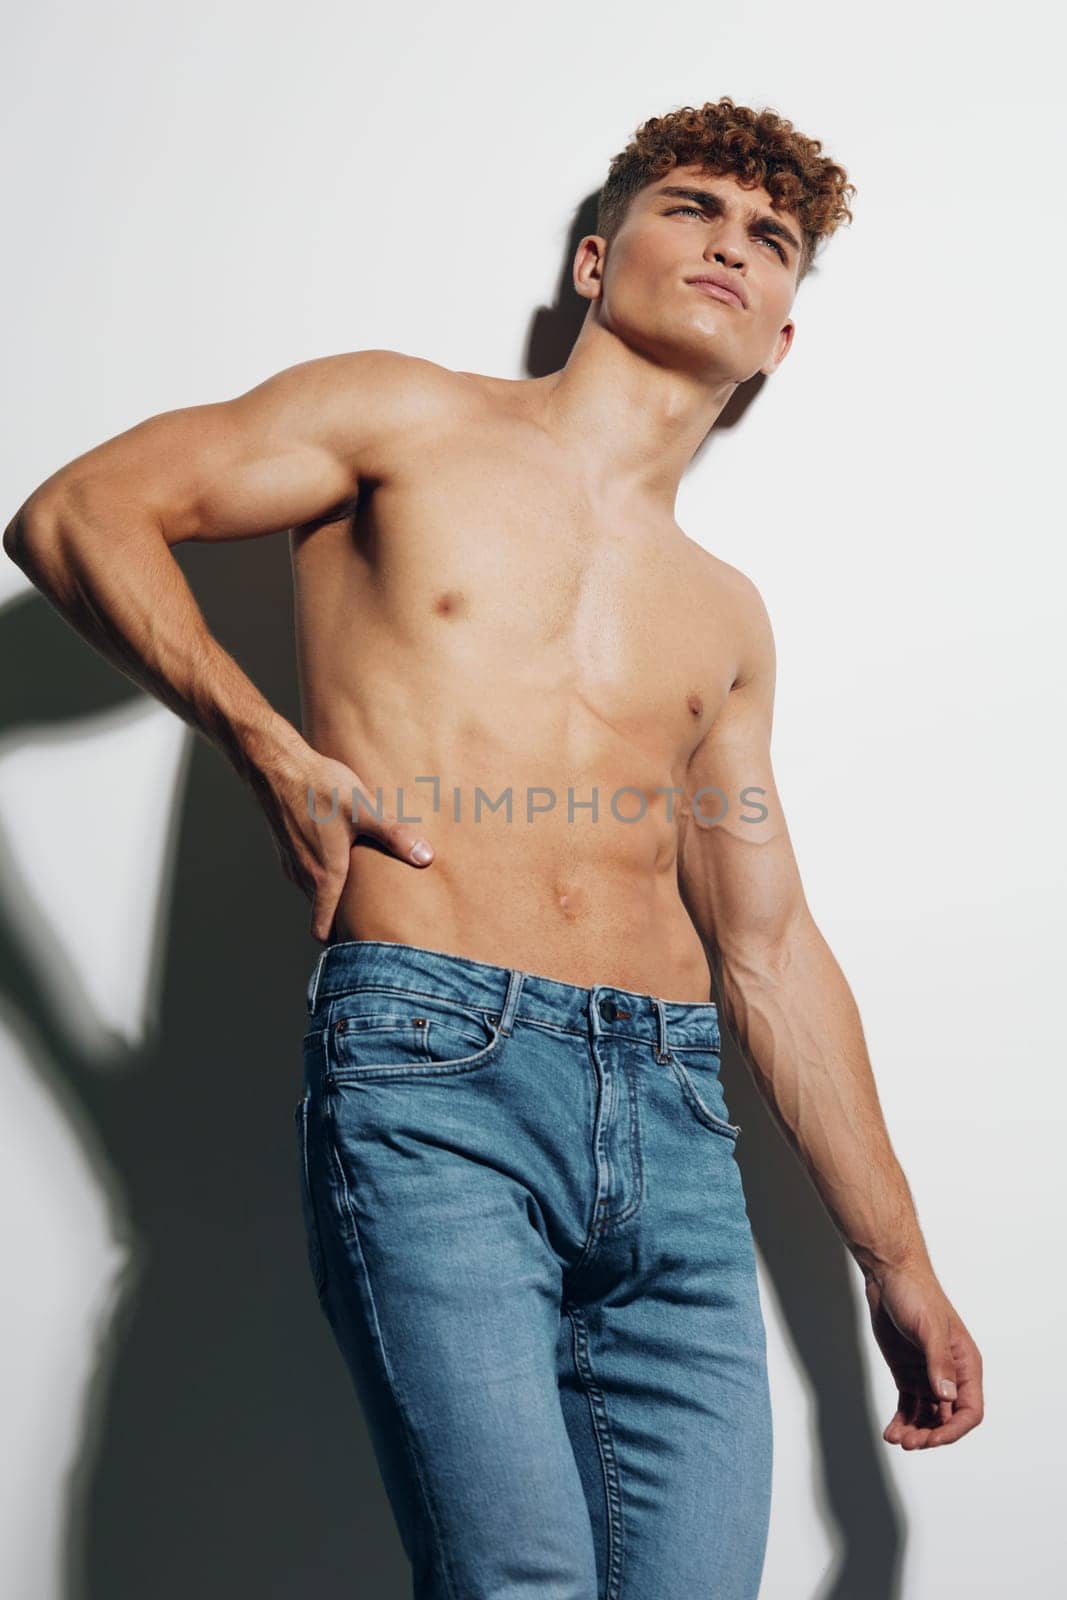 man chest young athlete body naked attractive white background torso jeans sexy health sport standing